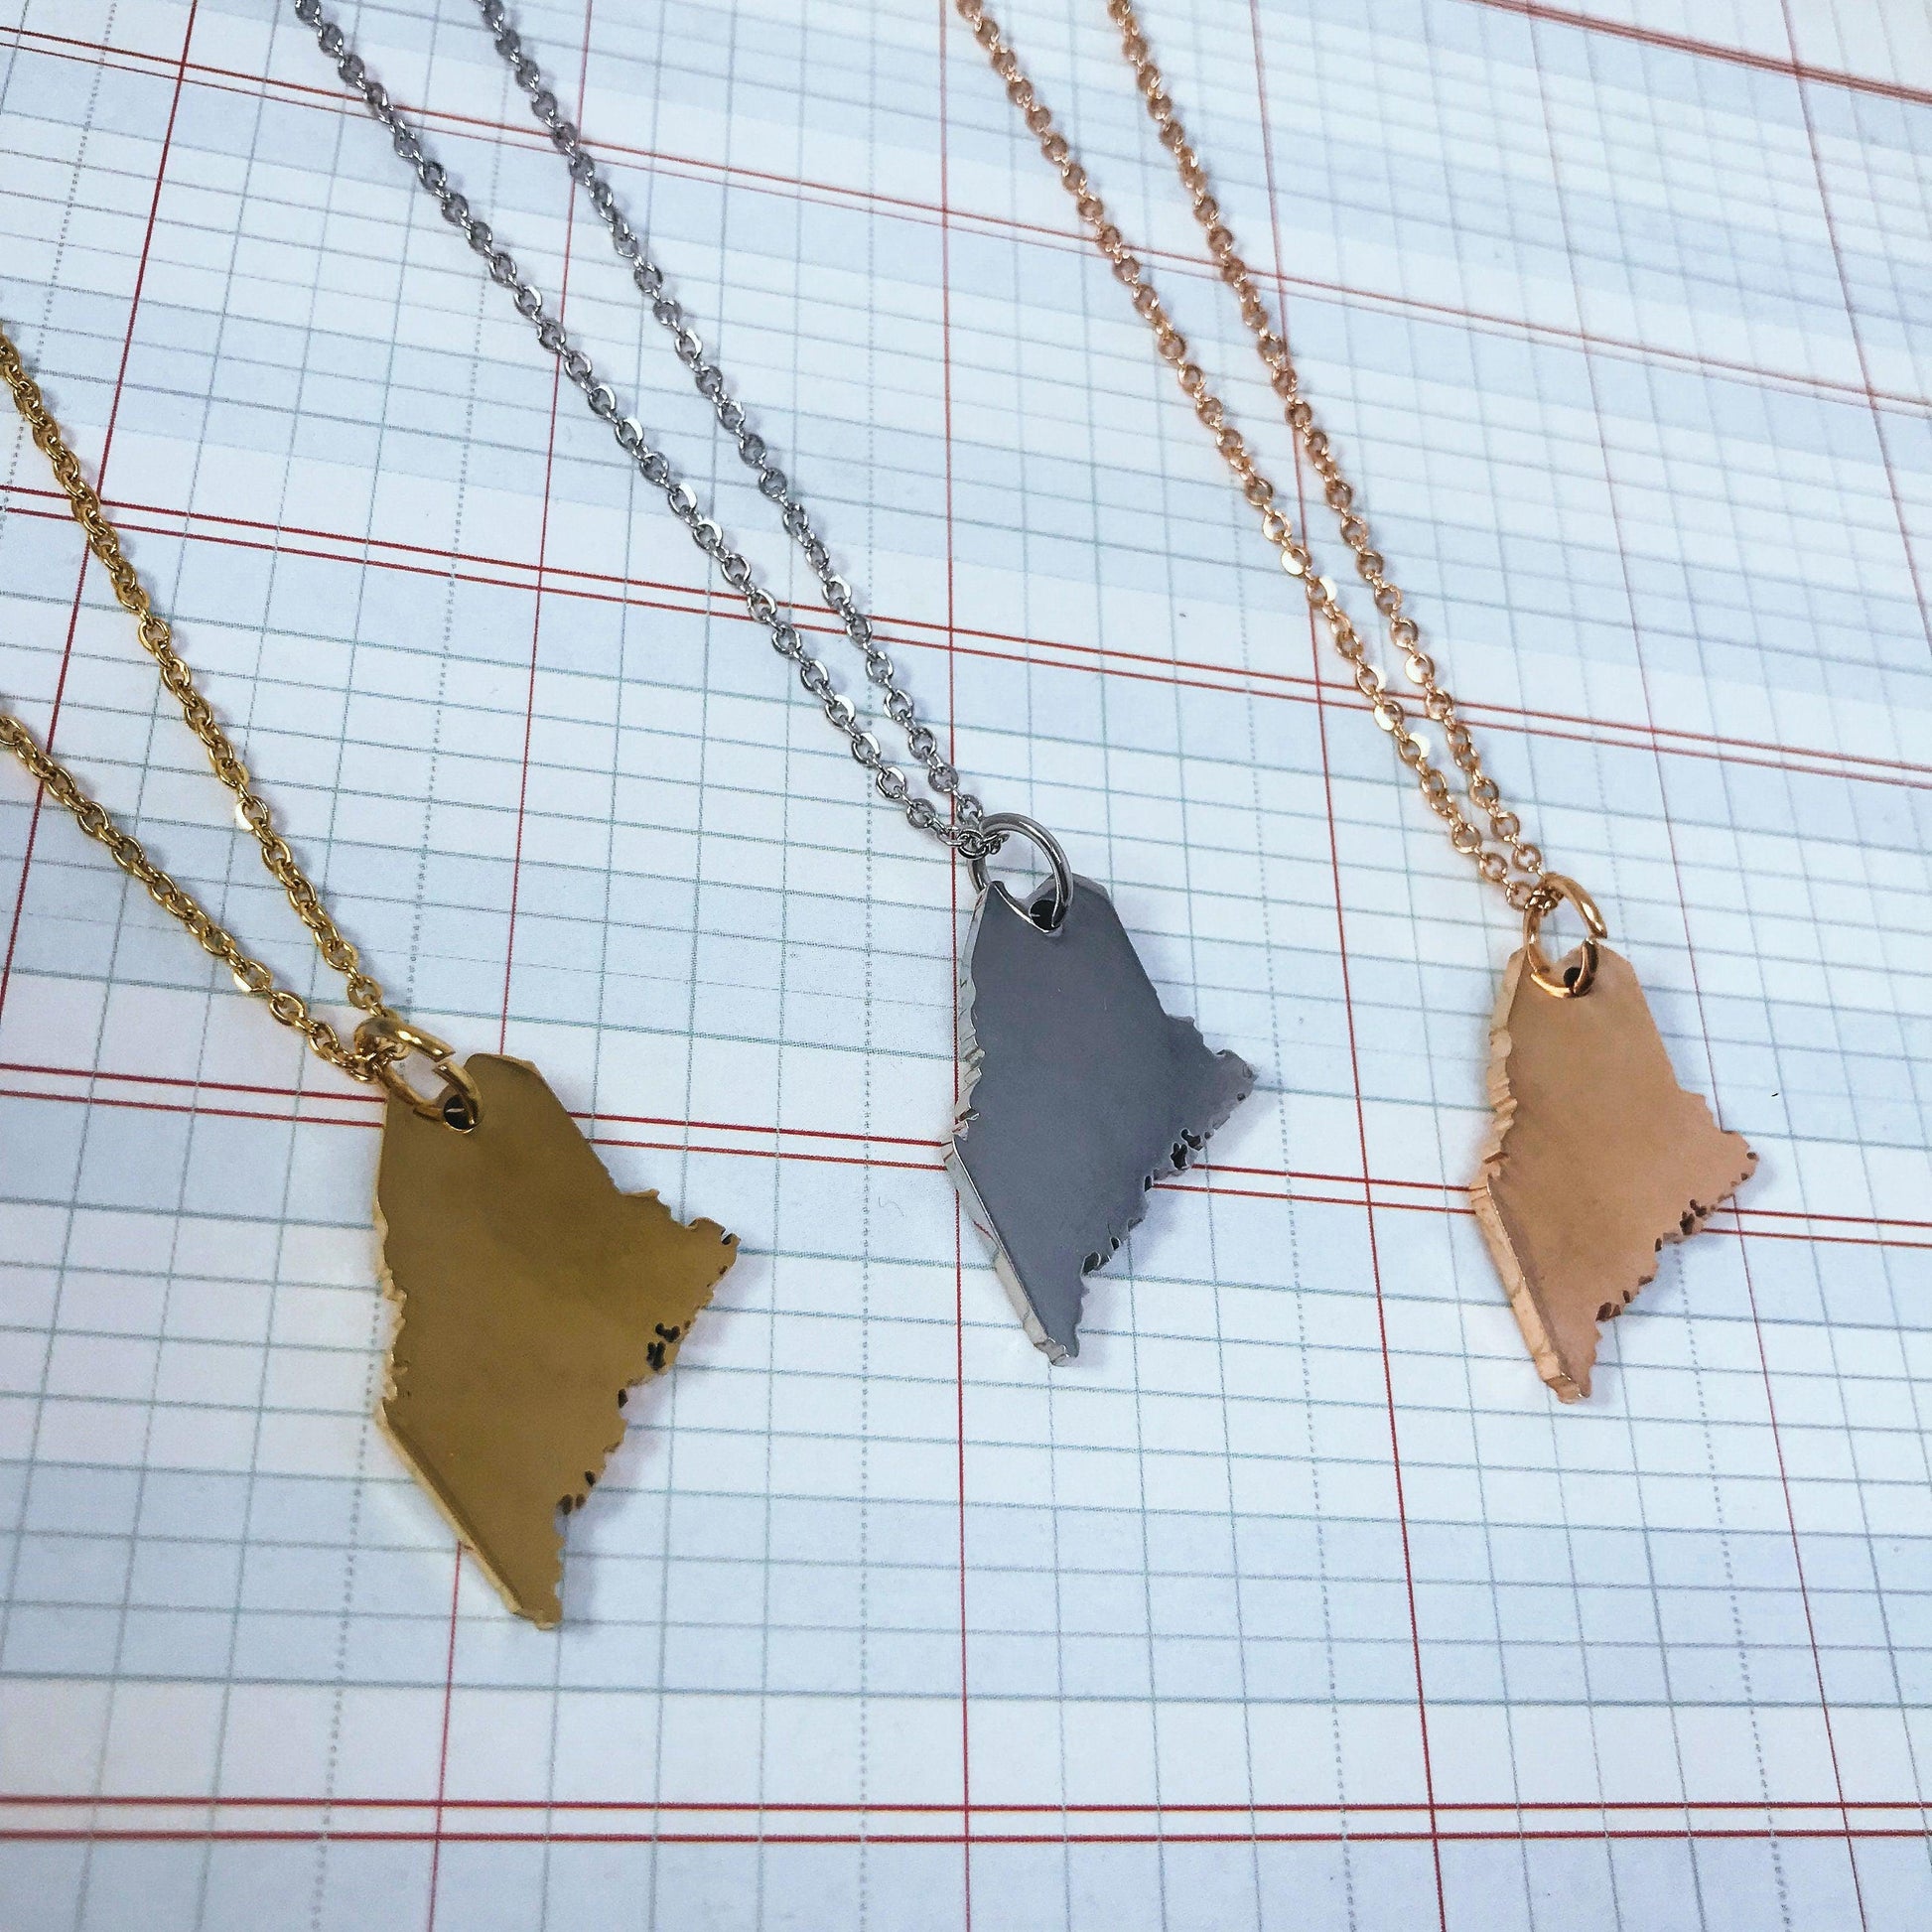 Maine State Silhouette Necklaces in 3 different colors: Gold, Silver & Rose Gold